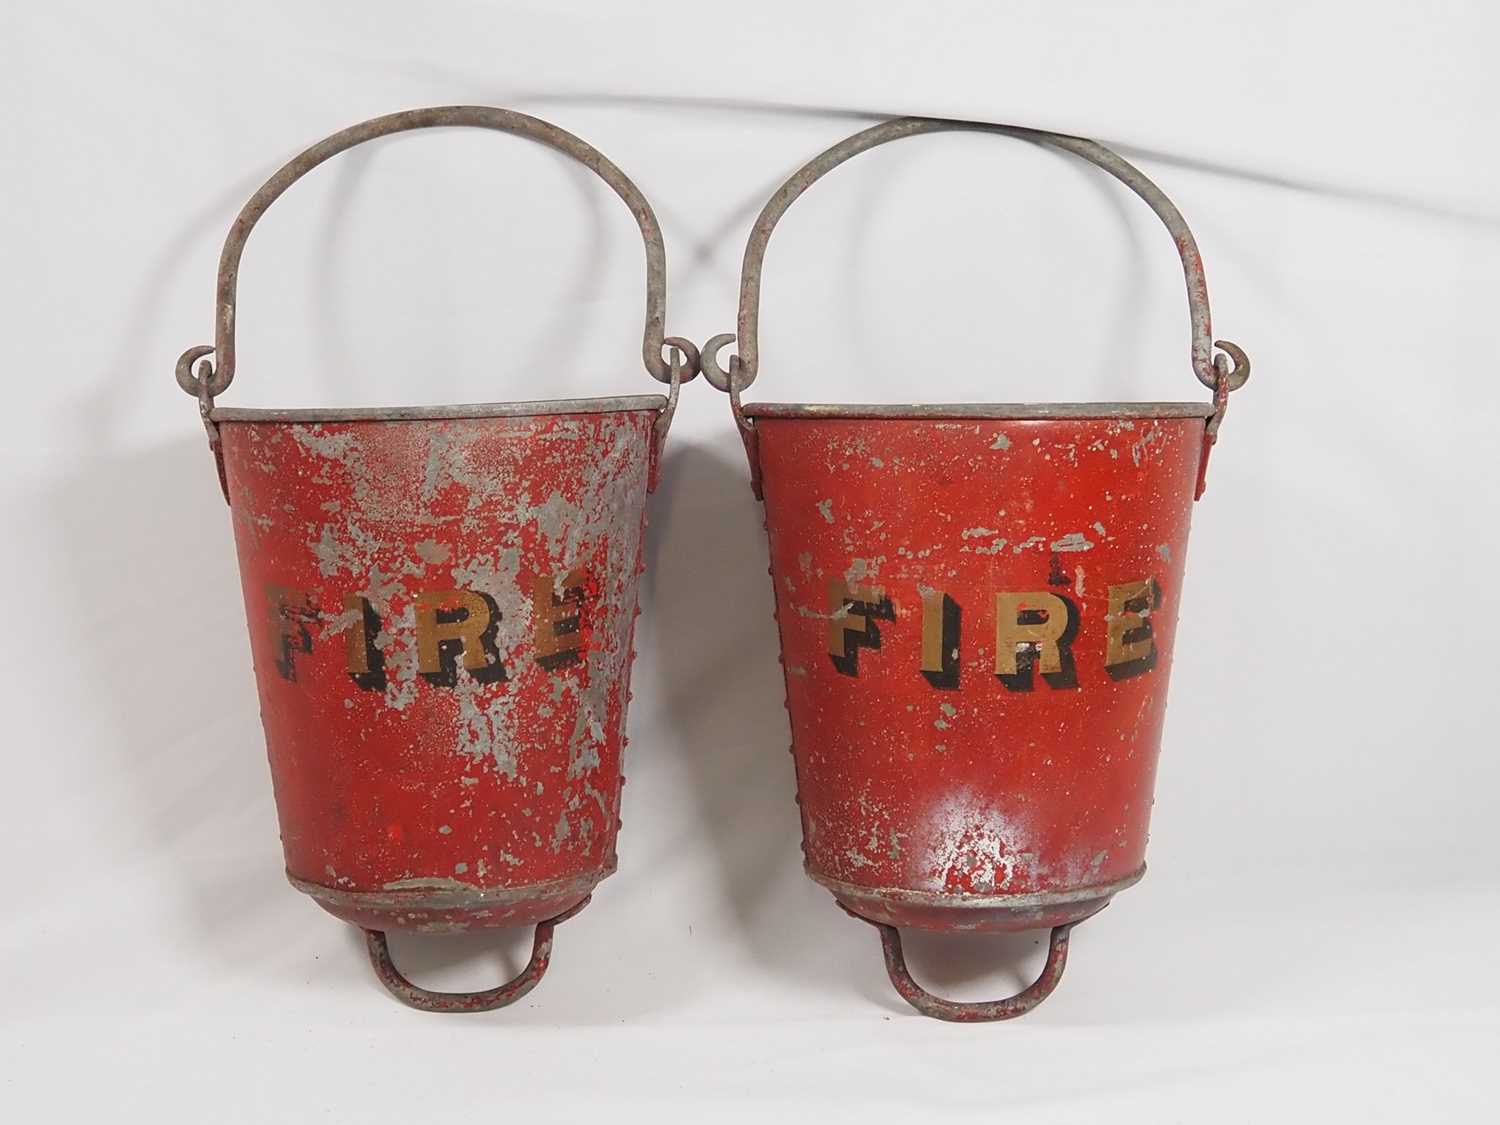 Vintage Fire buckets (3) - Image 2 of 2